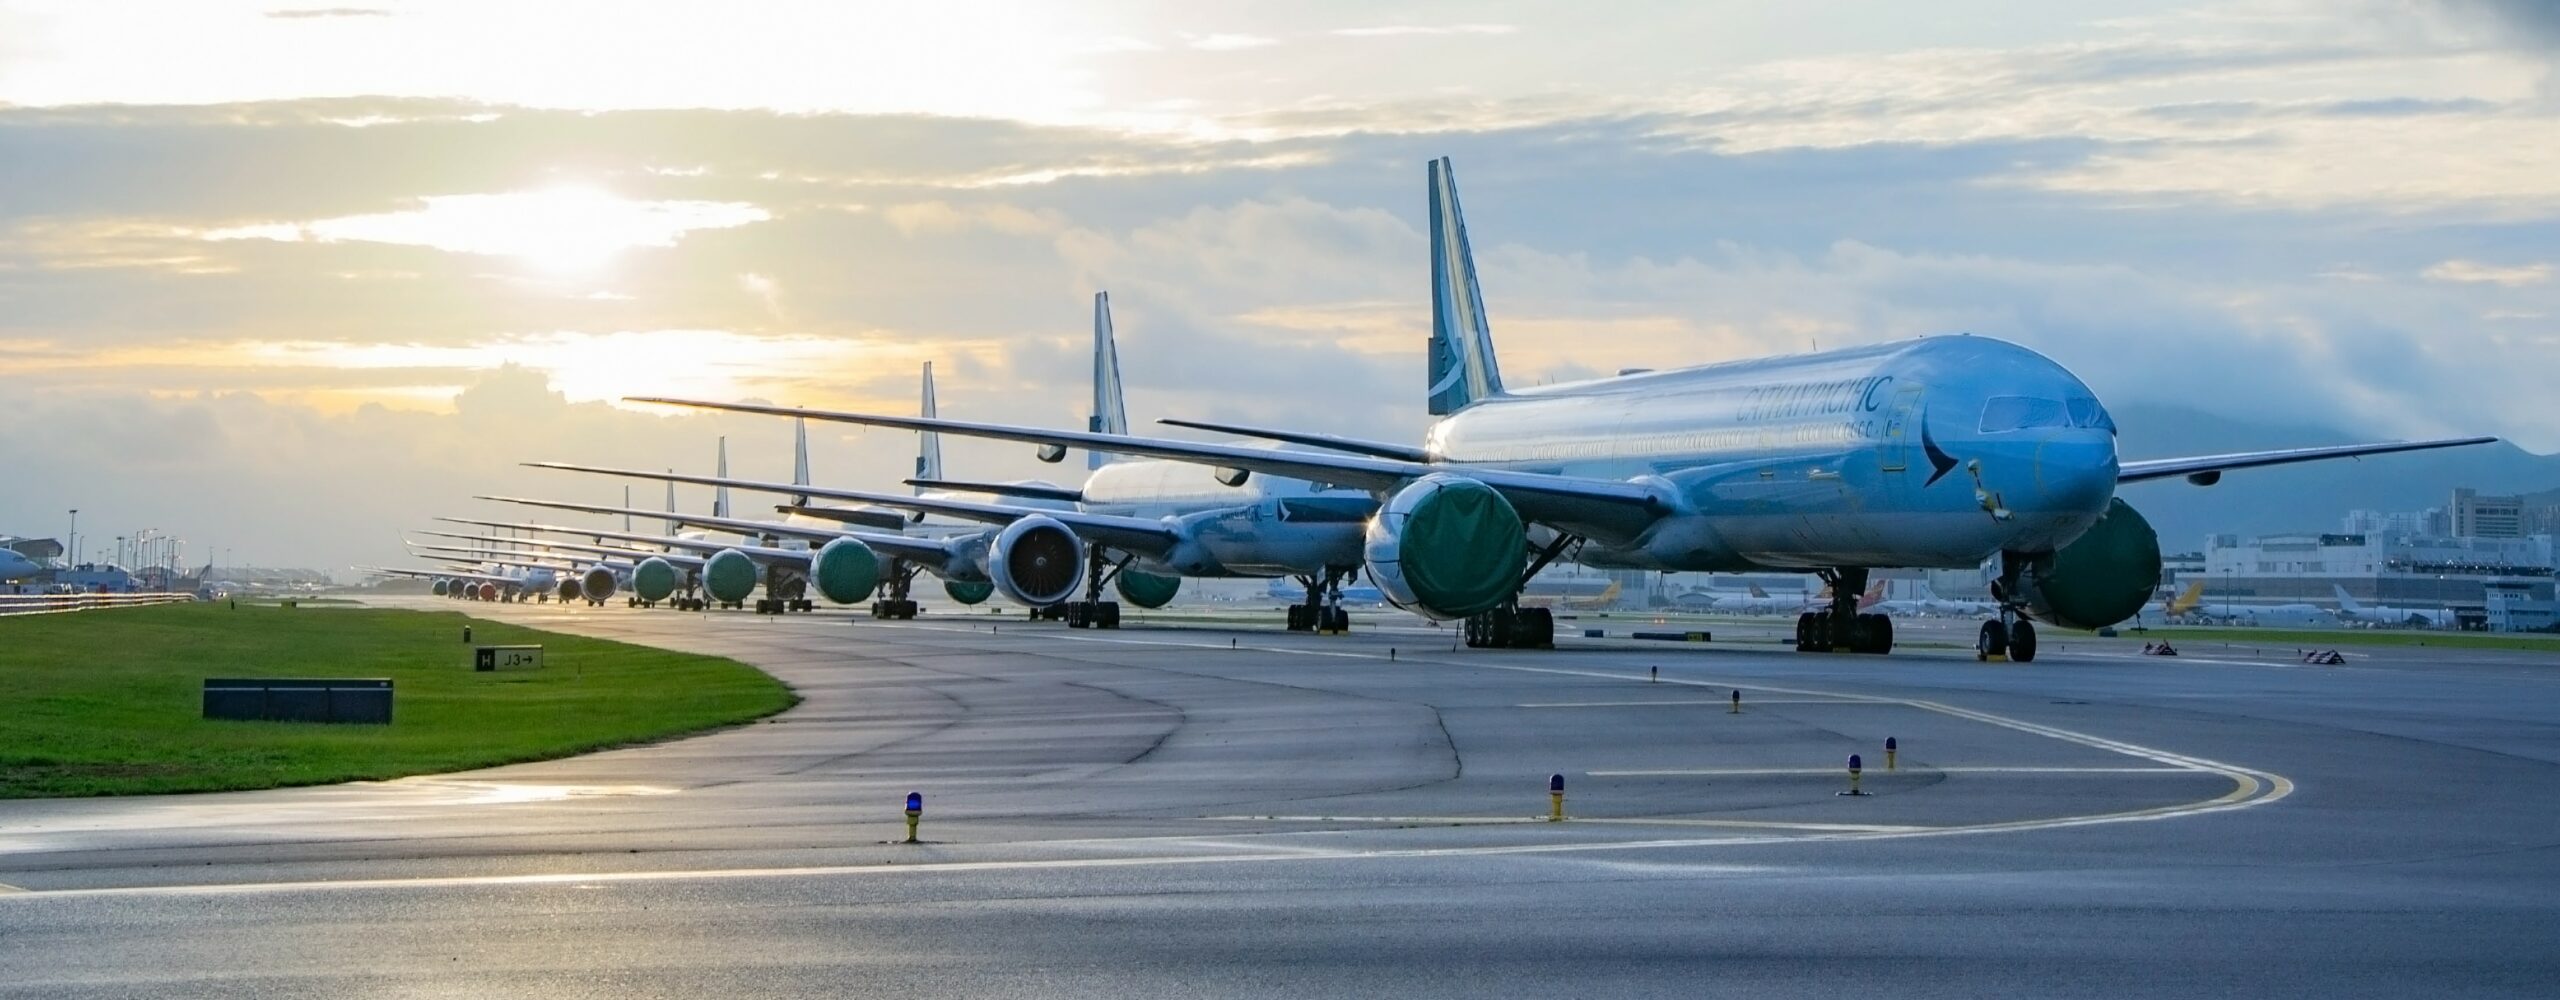 A queue of airplanes lined up on the tarmac of an airport.